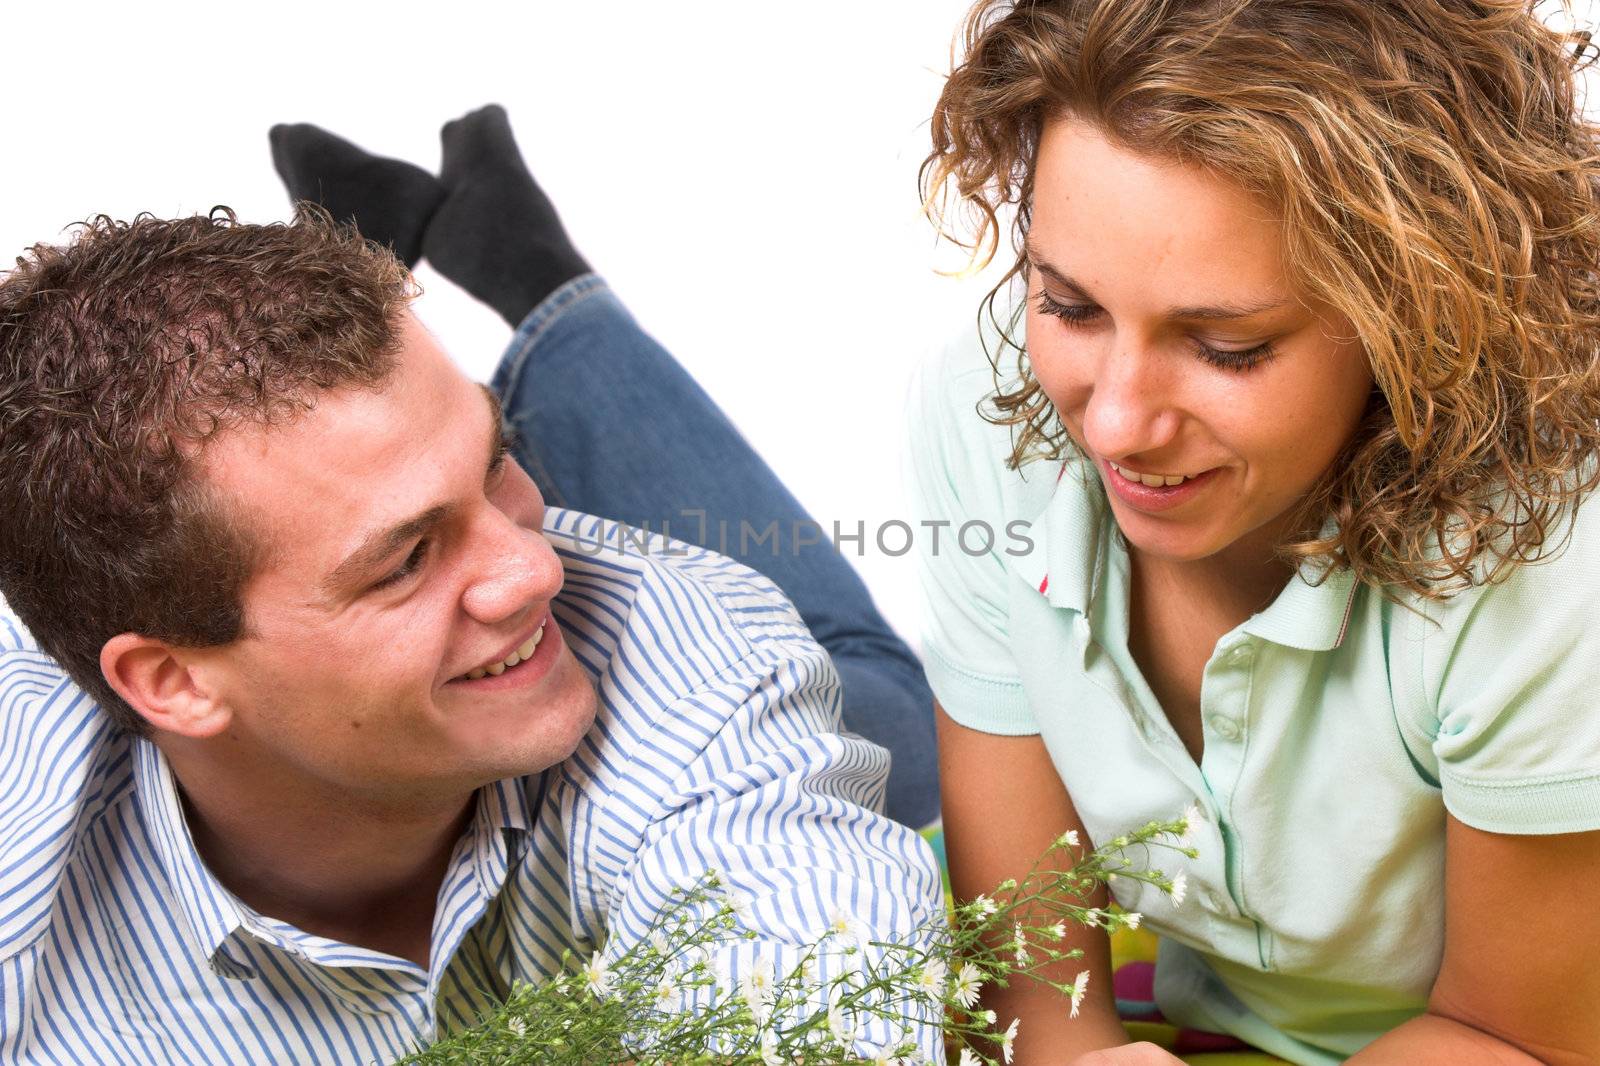 Boy and girl lying together on a picnic blanket, laughing and clearly in love